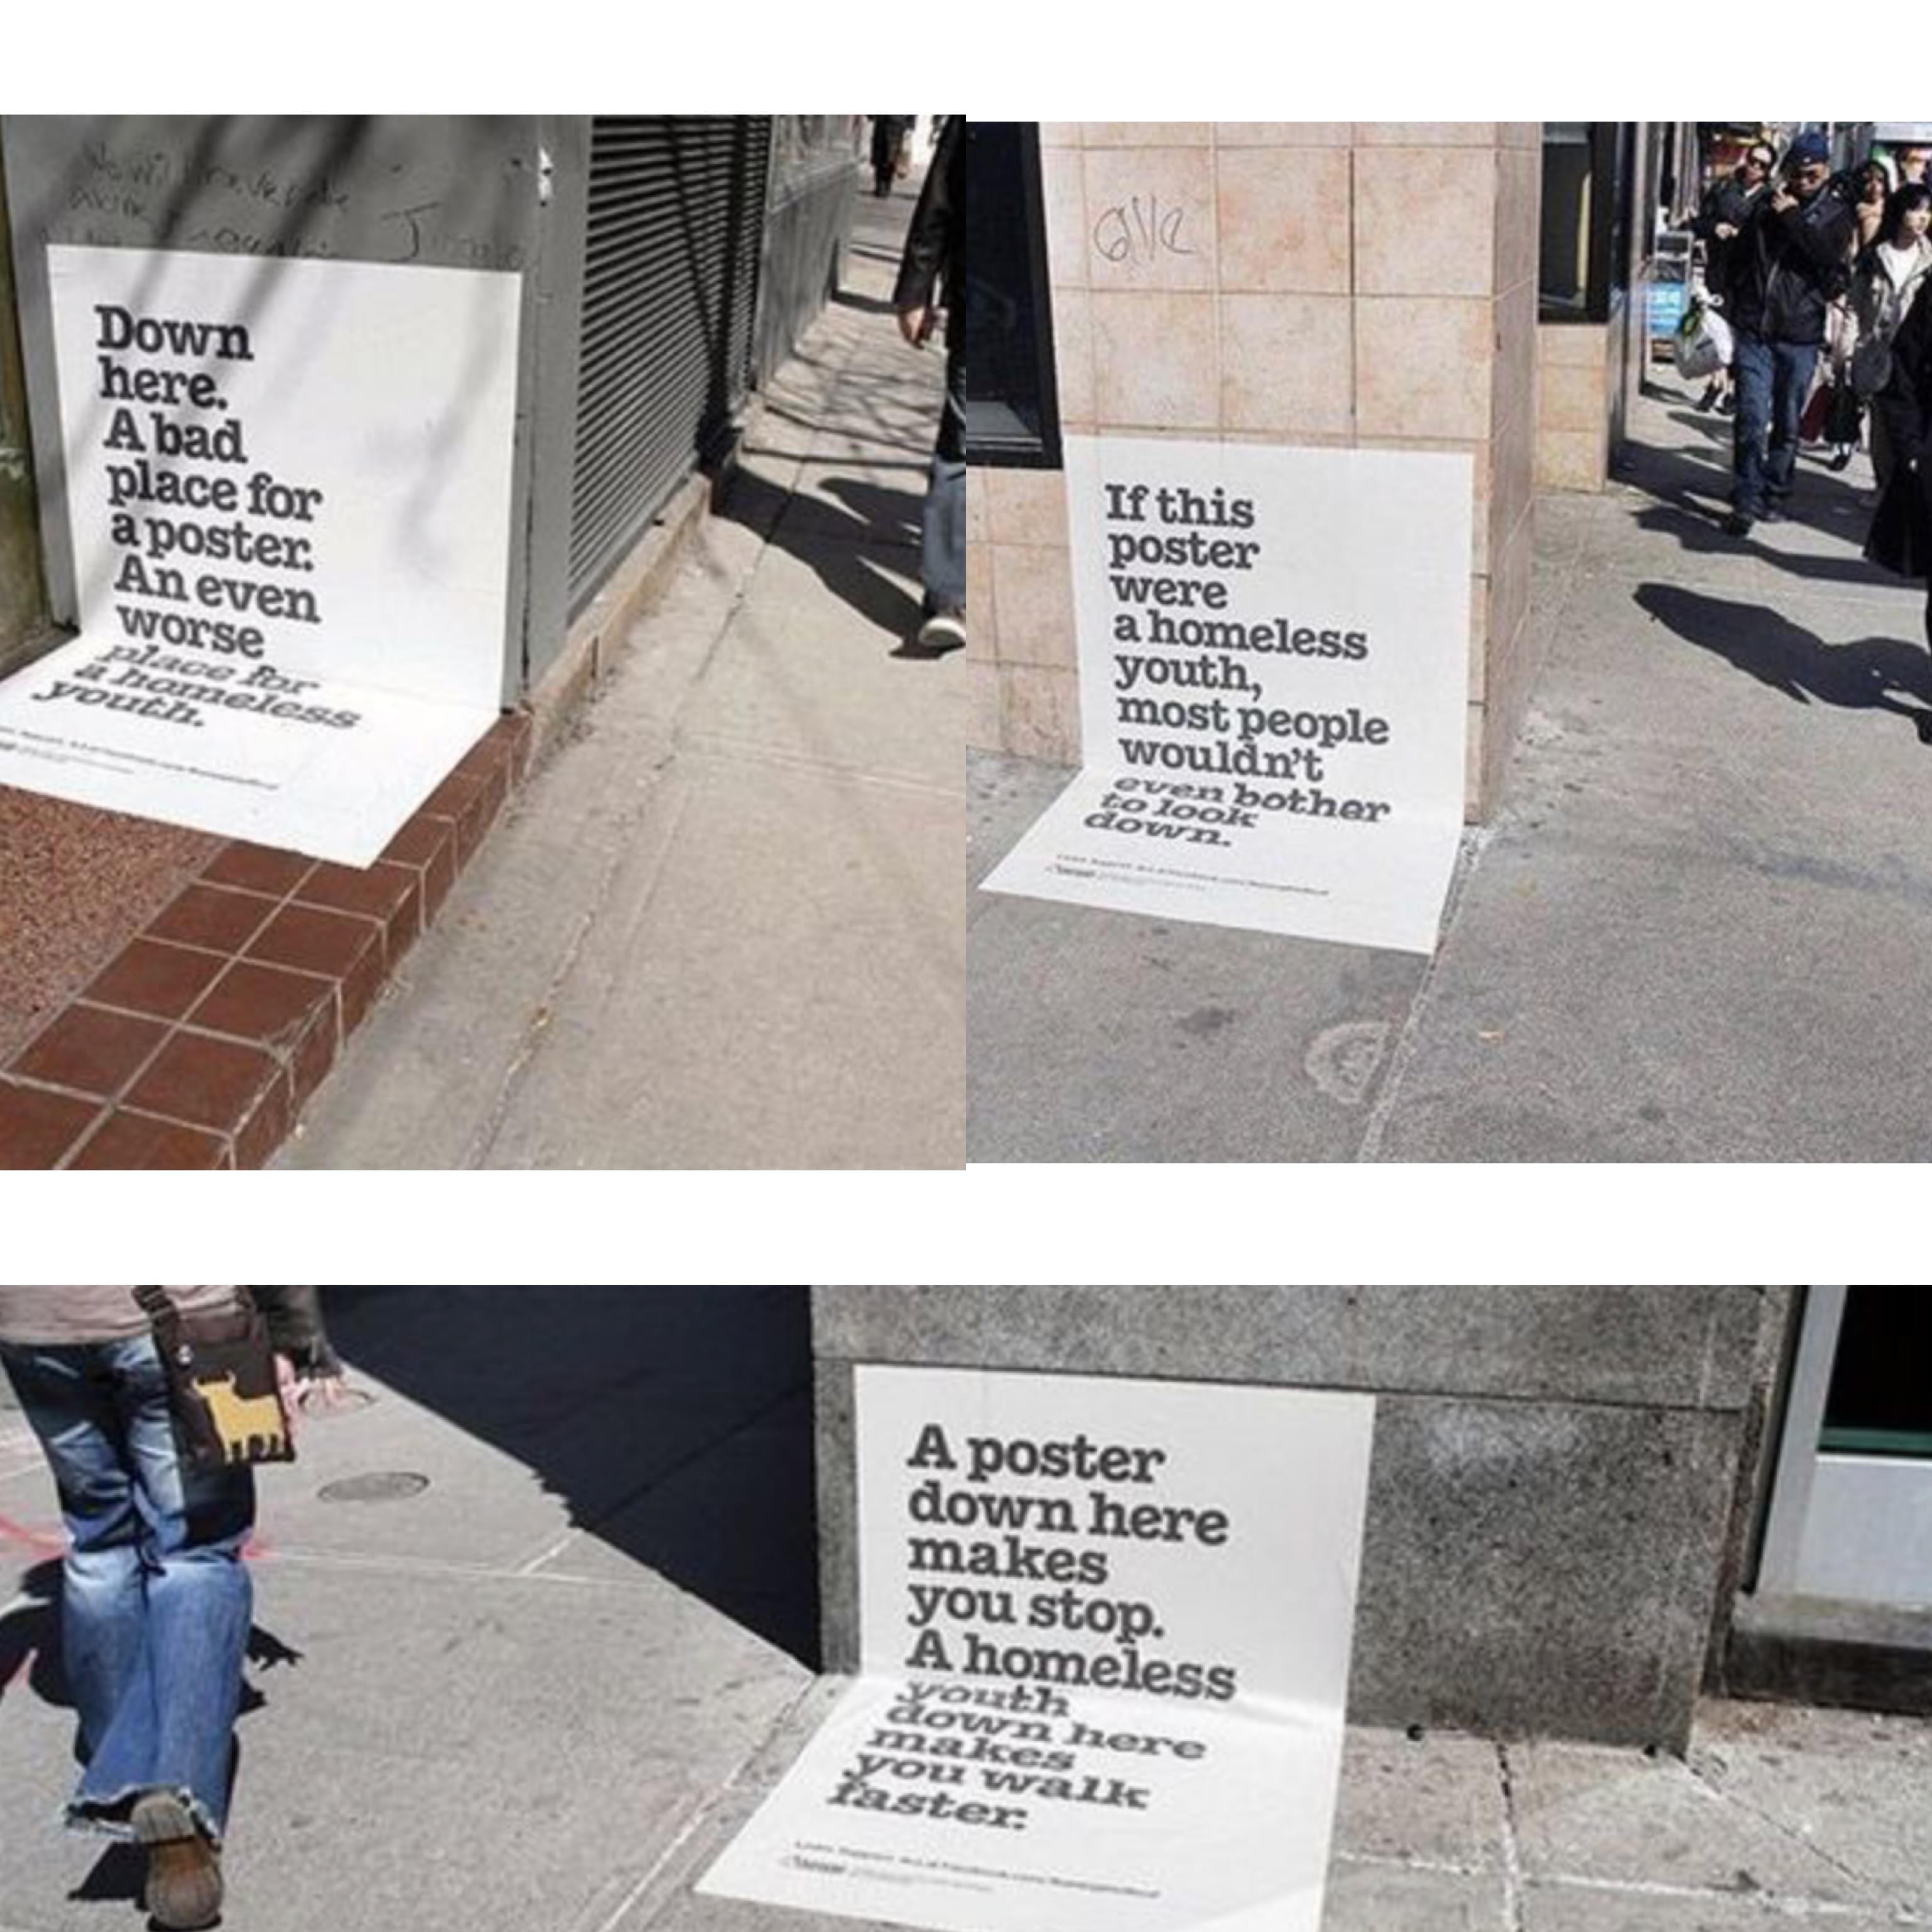 This guerrilla campaign pulls at the heartstrings of people passing by